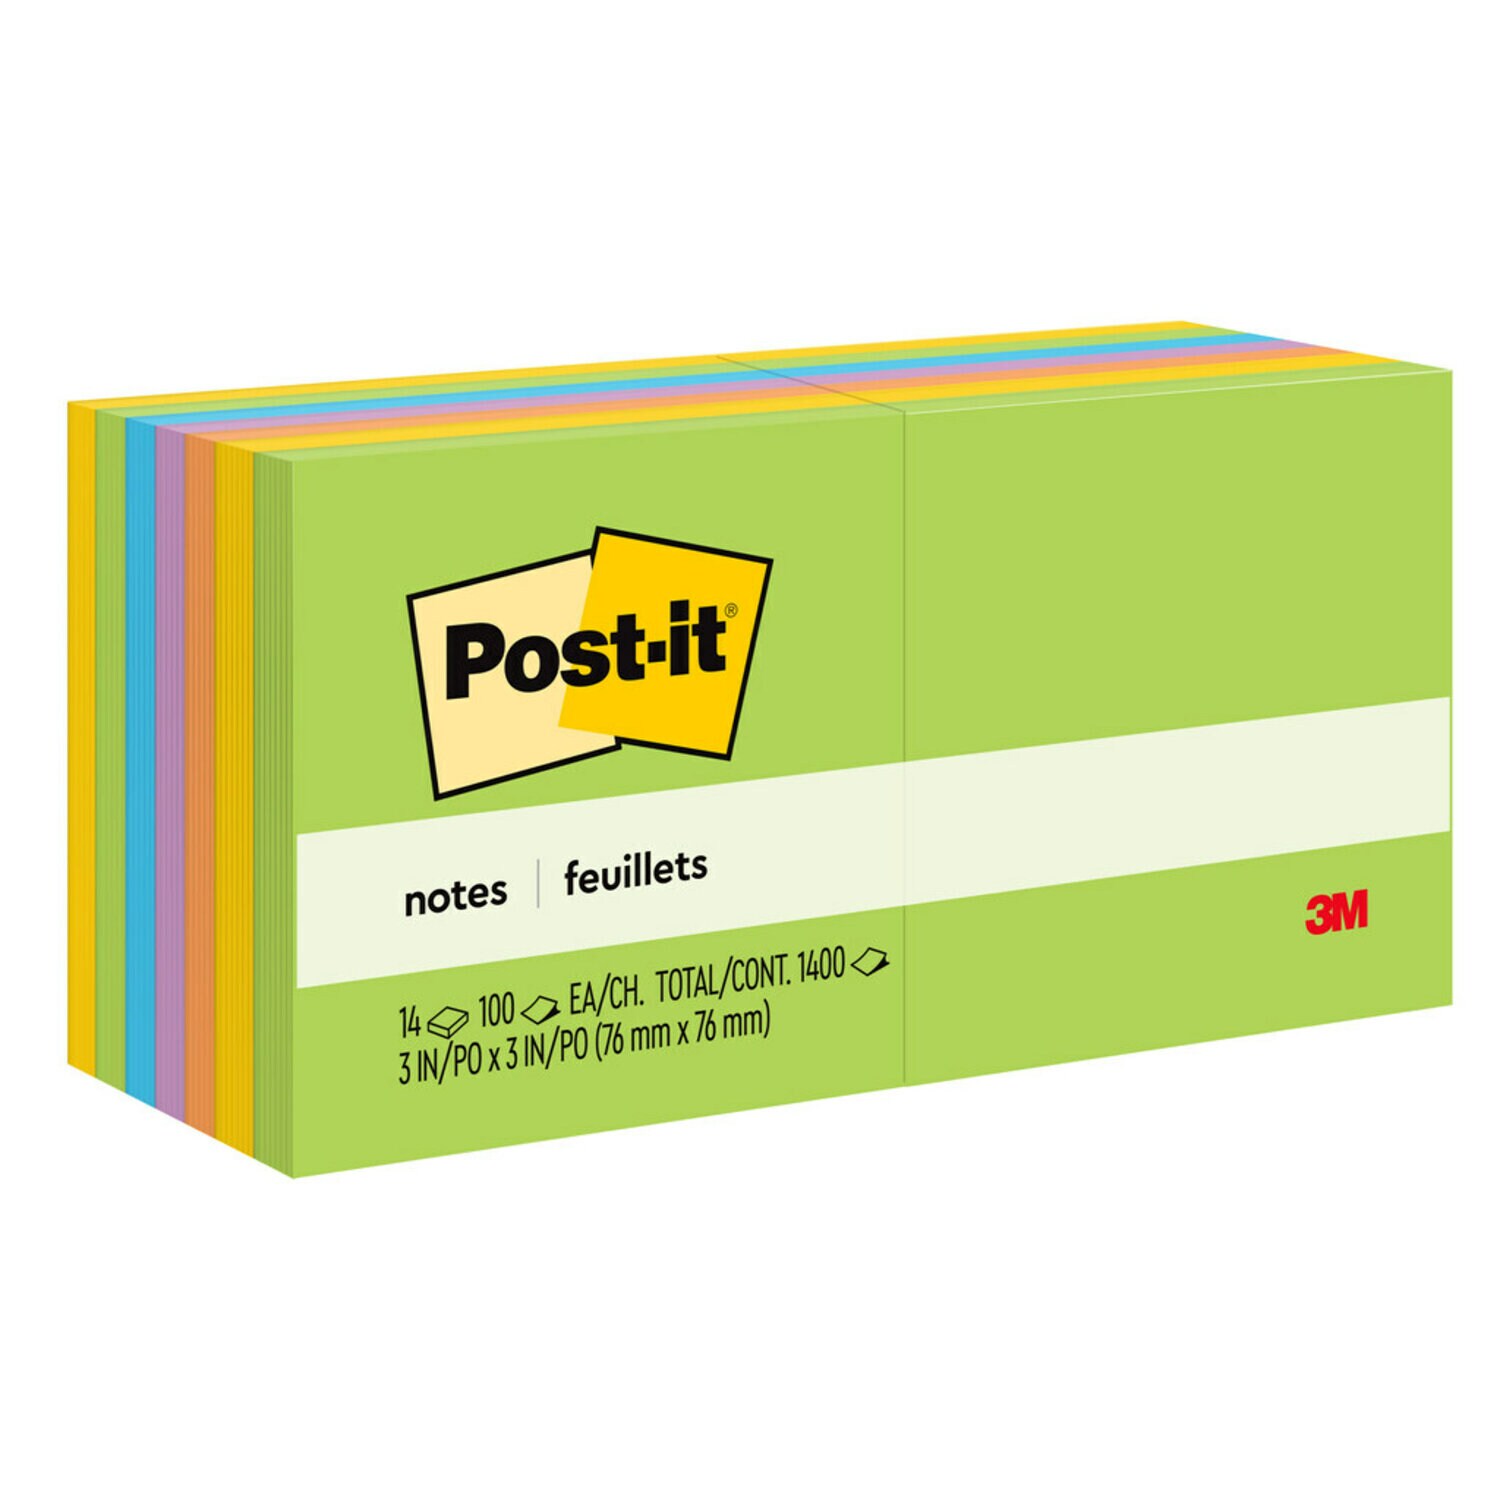 7100230171 - Post-it Notes 654-14AU, 3 in x 3 in (76 mm x 76 mm), Jaipur colors